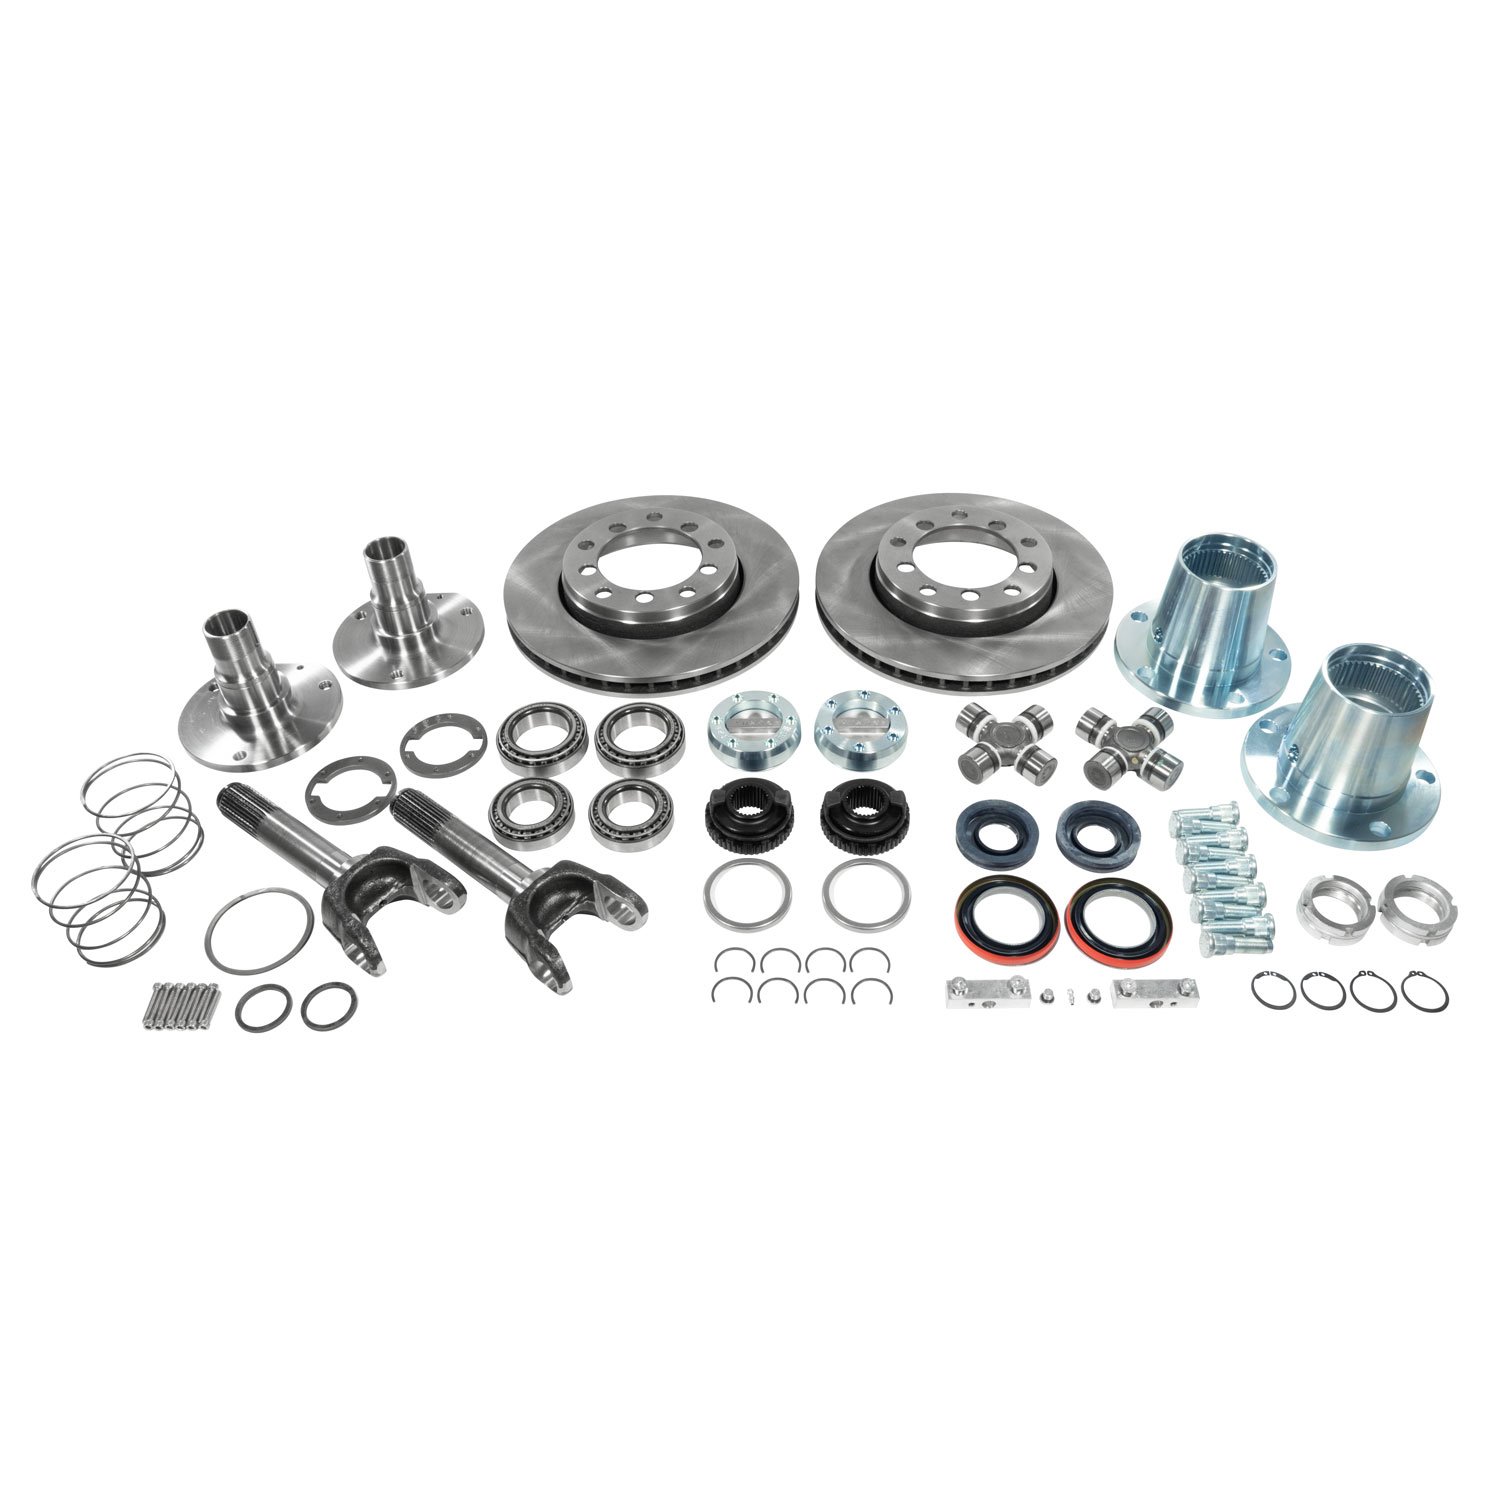 Spin Free Kit For Jeep '07-'18 Jeep Wrangler